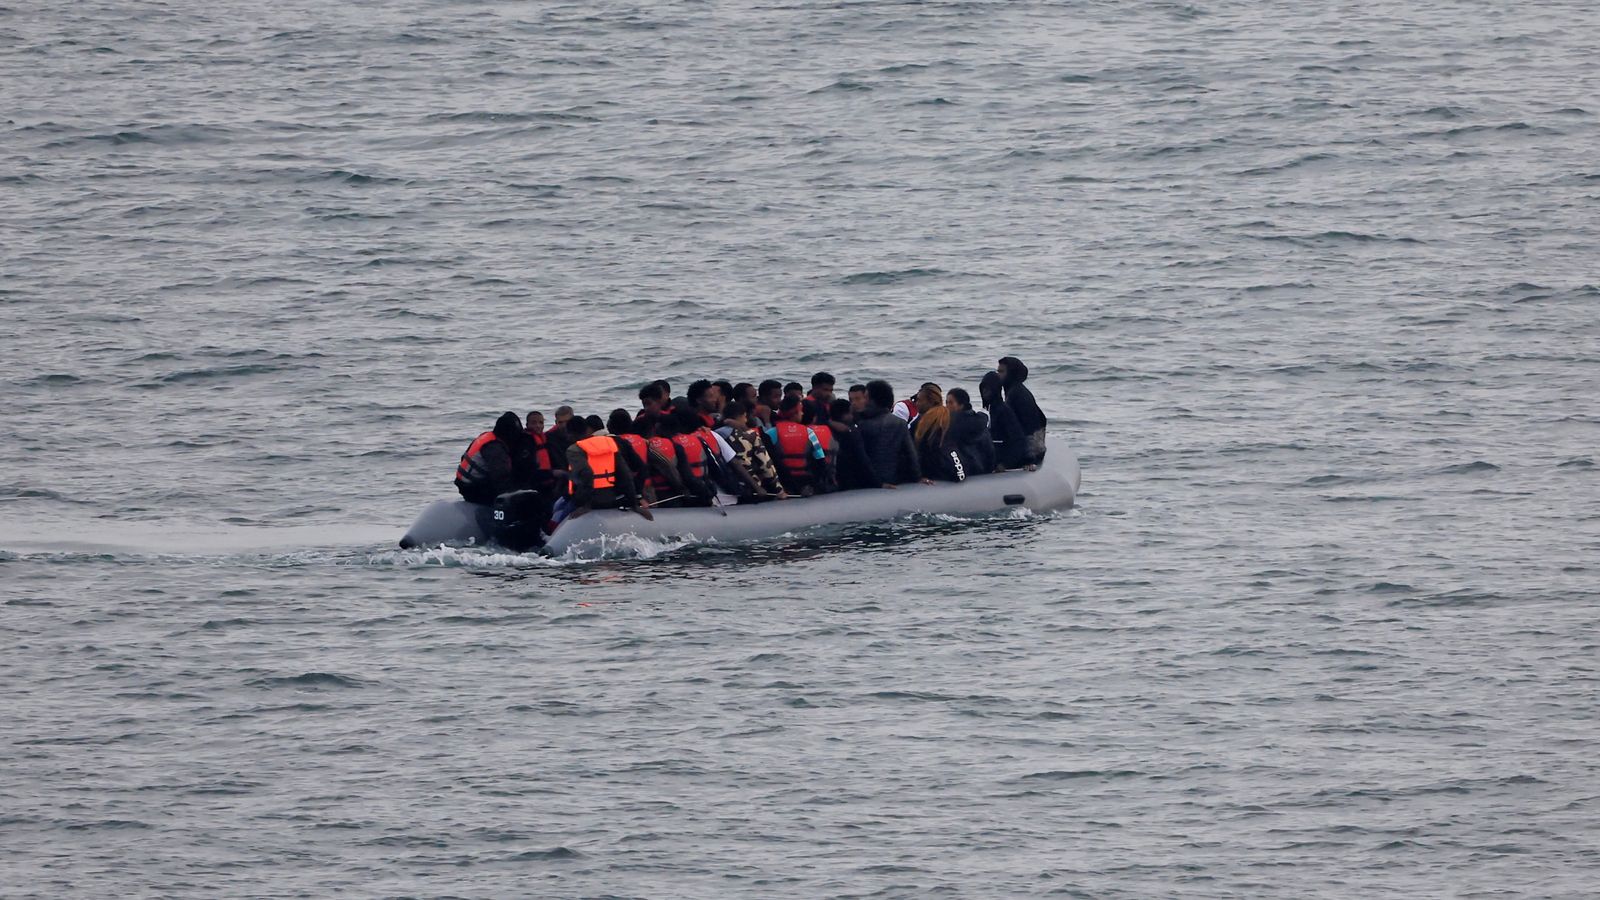 Channel crossing: One dead and another critical after boat carrying migrants sinks